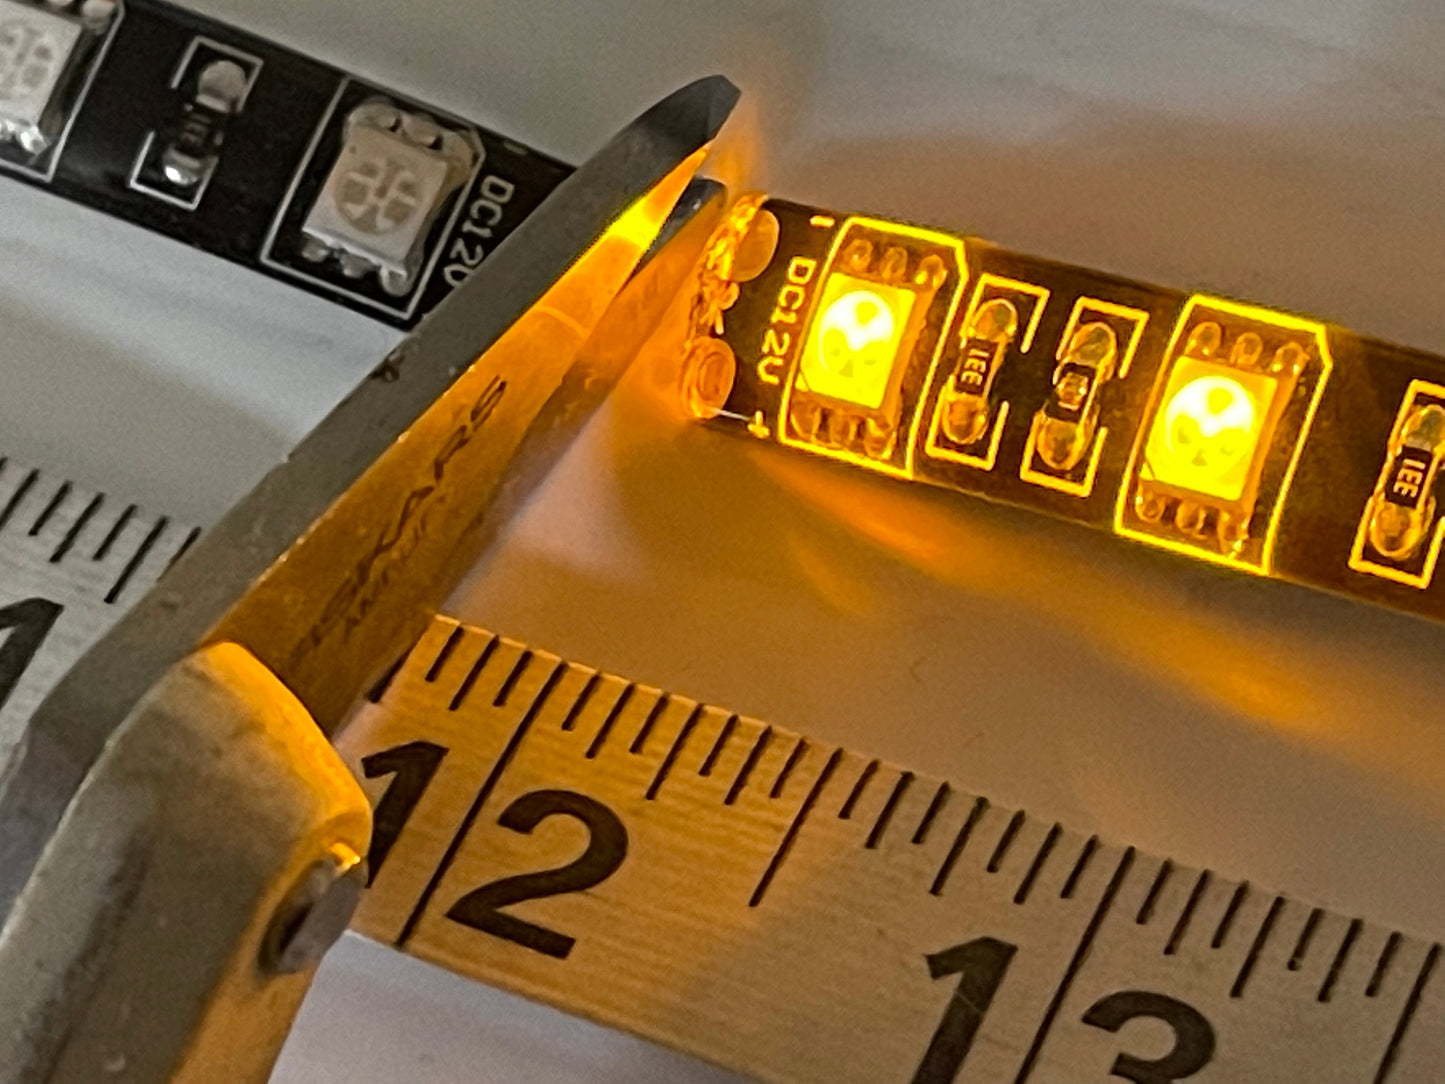 5 LED strips into 1 Battery 9V Connector - Steady On - Cuttable Project Cosplay Lights